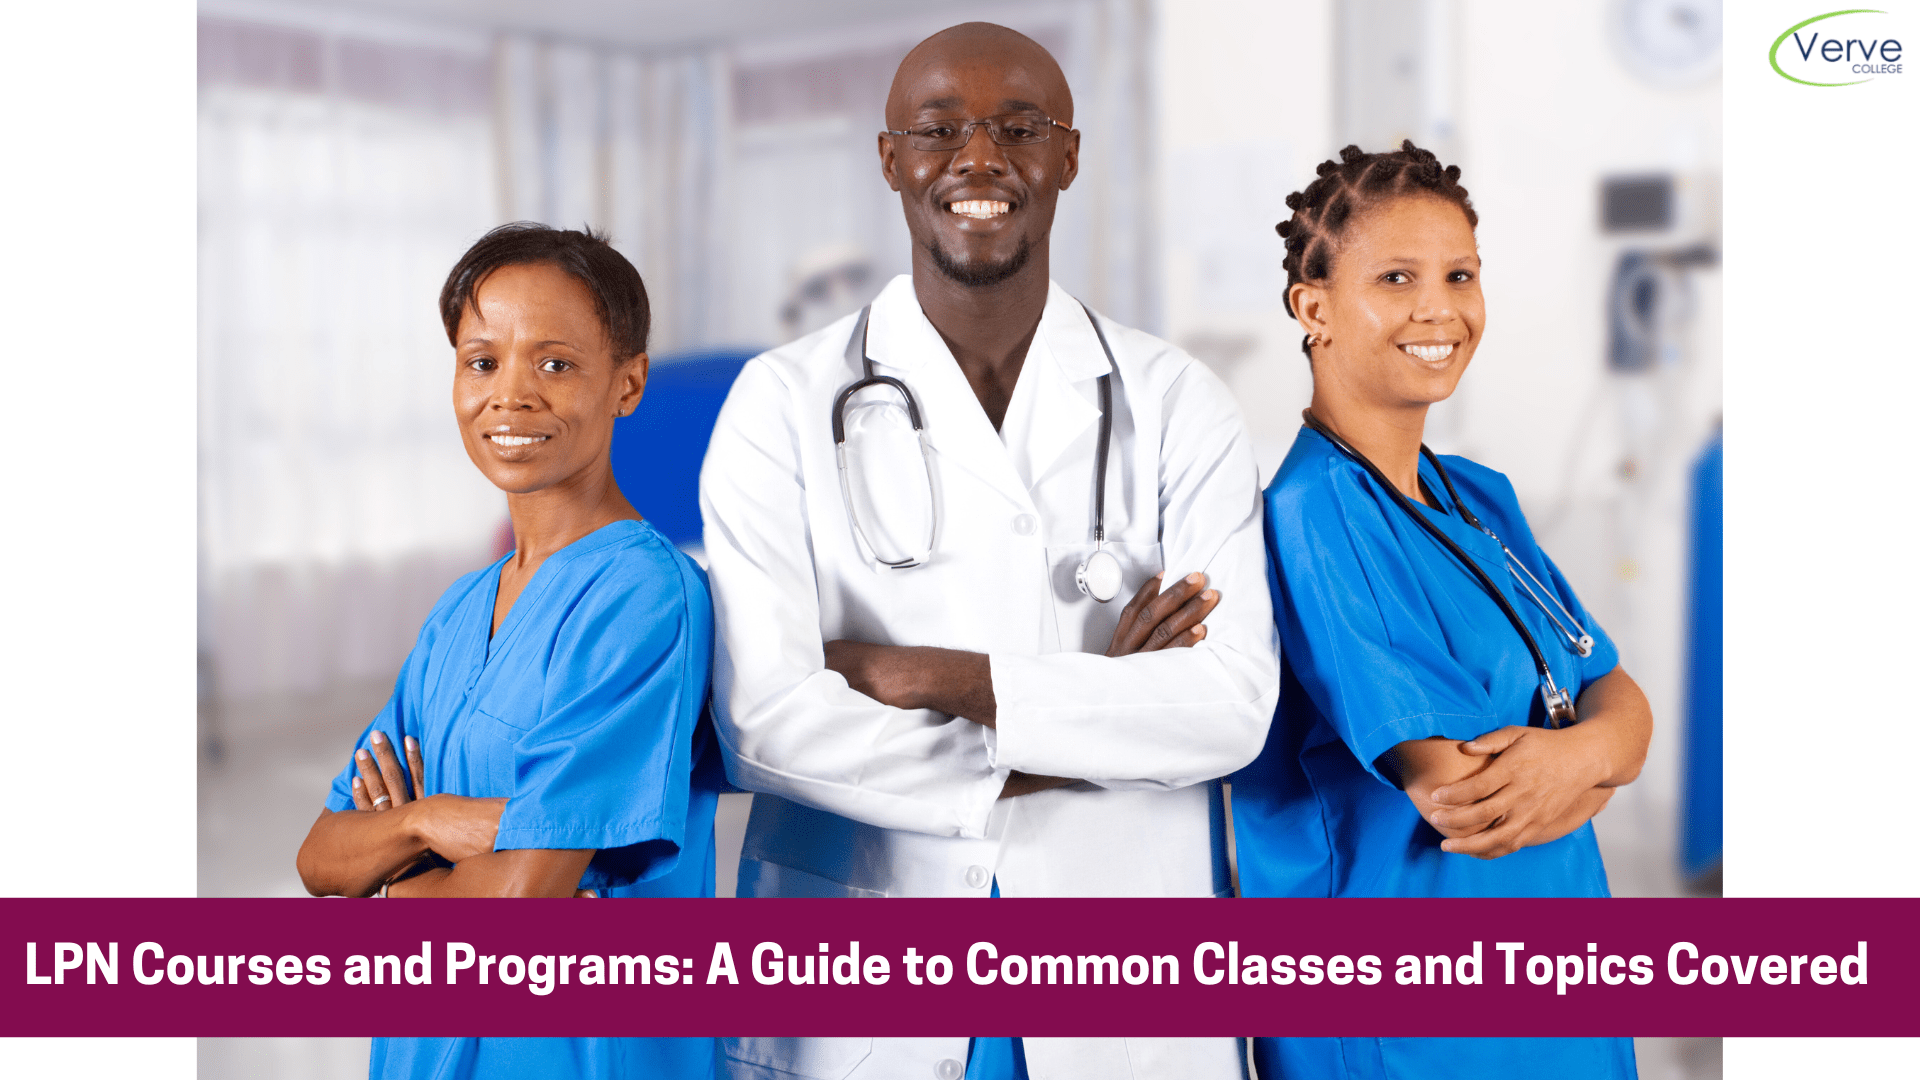 LPN Courses and Programs: A Guide to Common Classes and Topics Covered